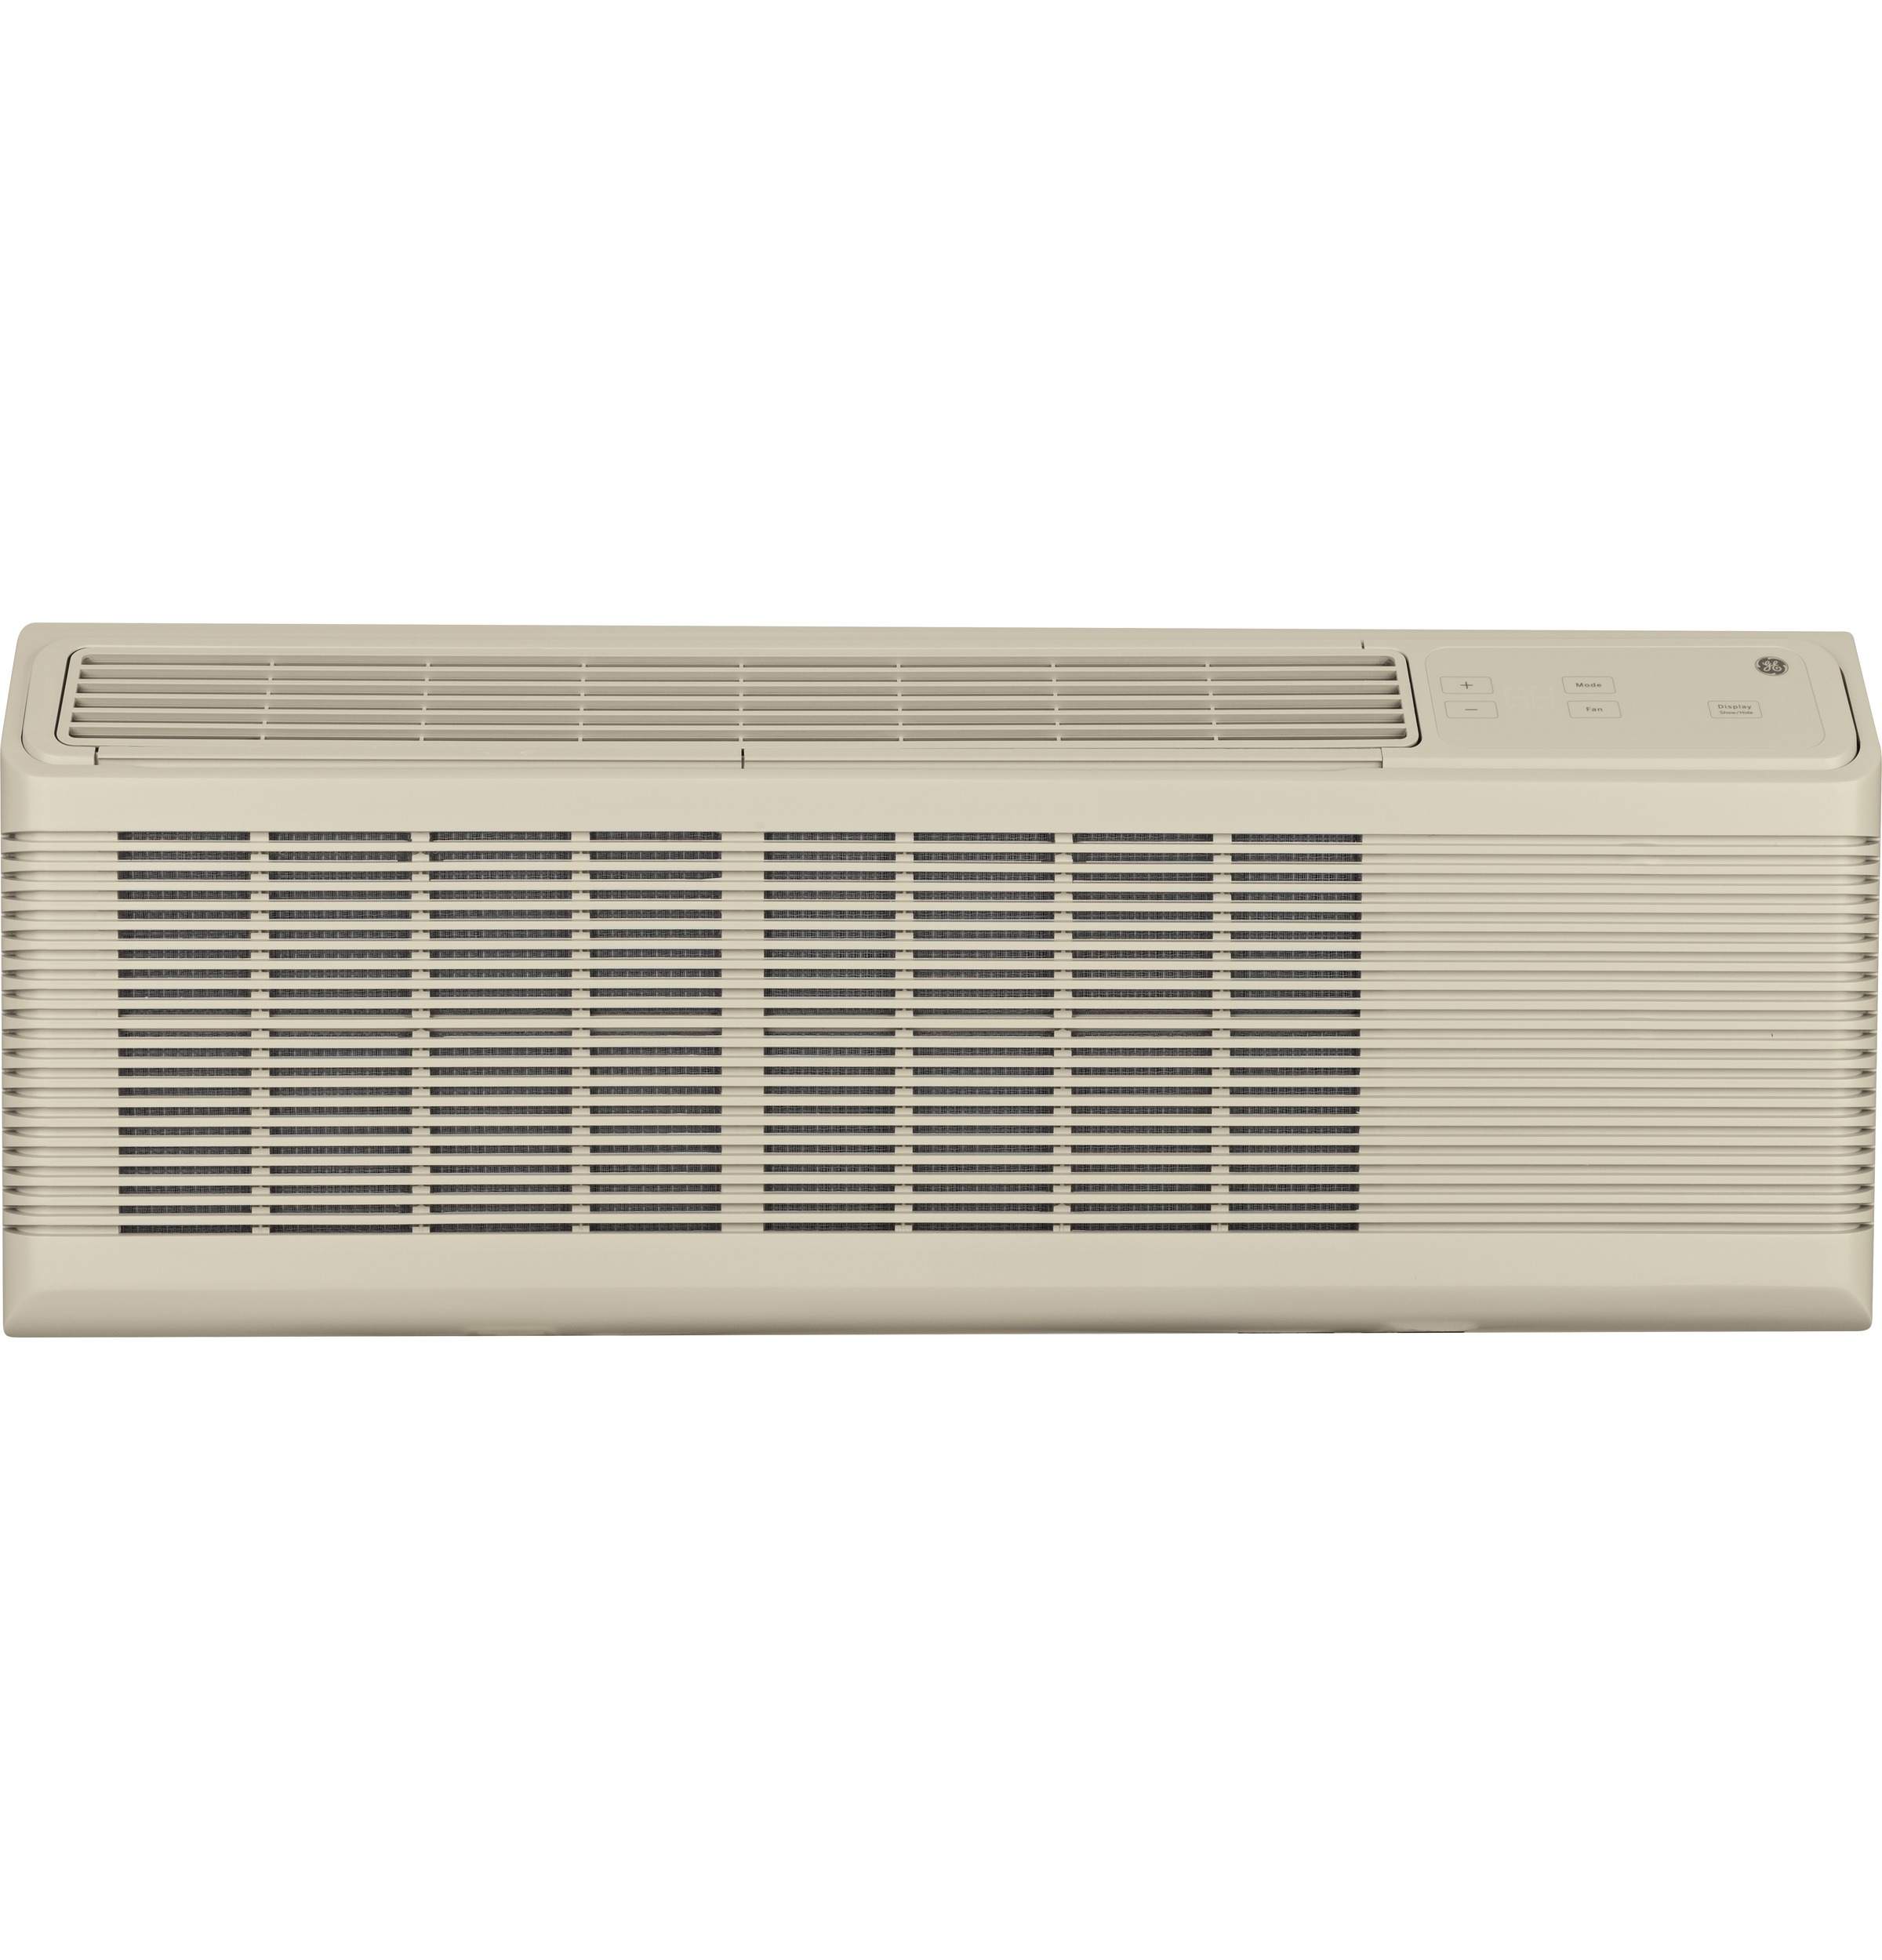 GE AZ65H15DAB 15,000 BTU Class Zoneline PTAC Air Conditioner with Heat Pump - Power Cord Included